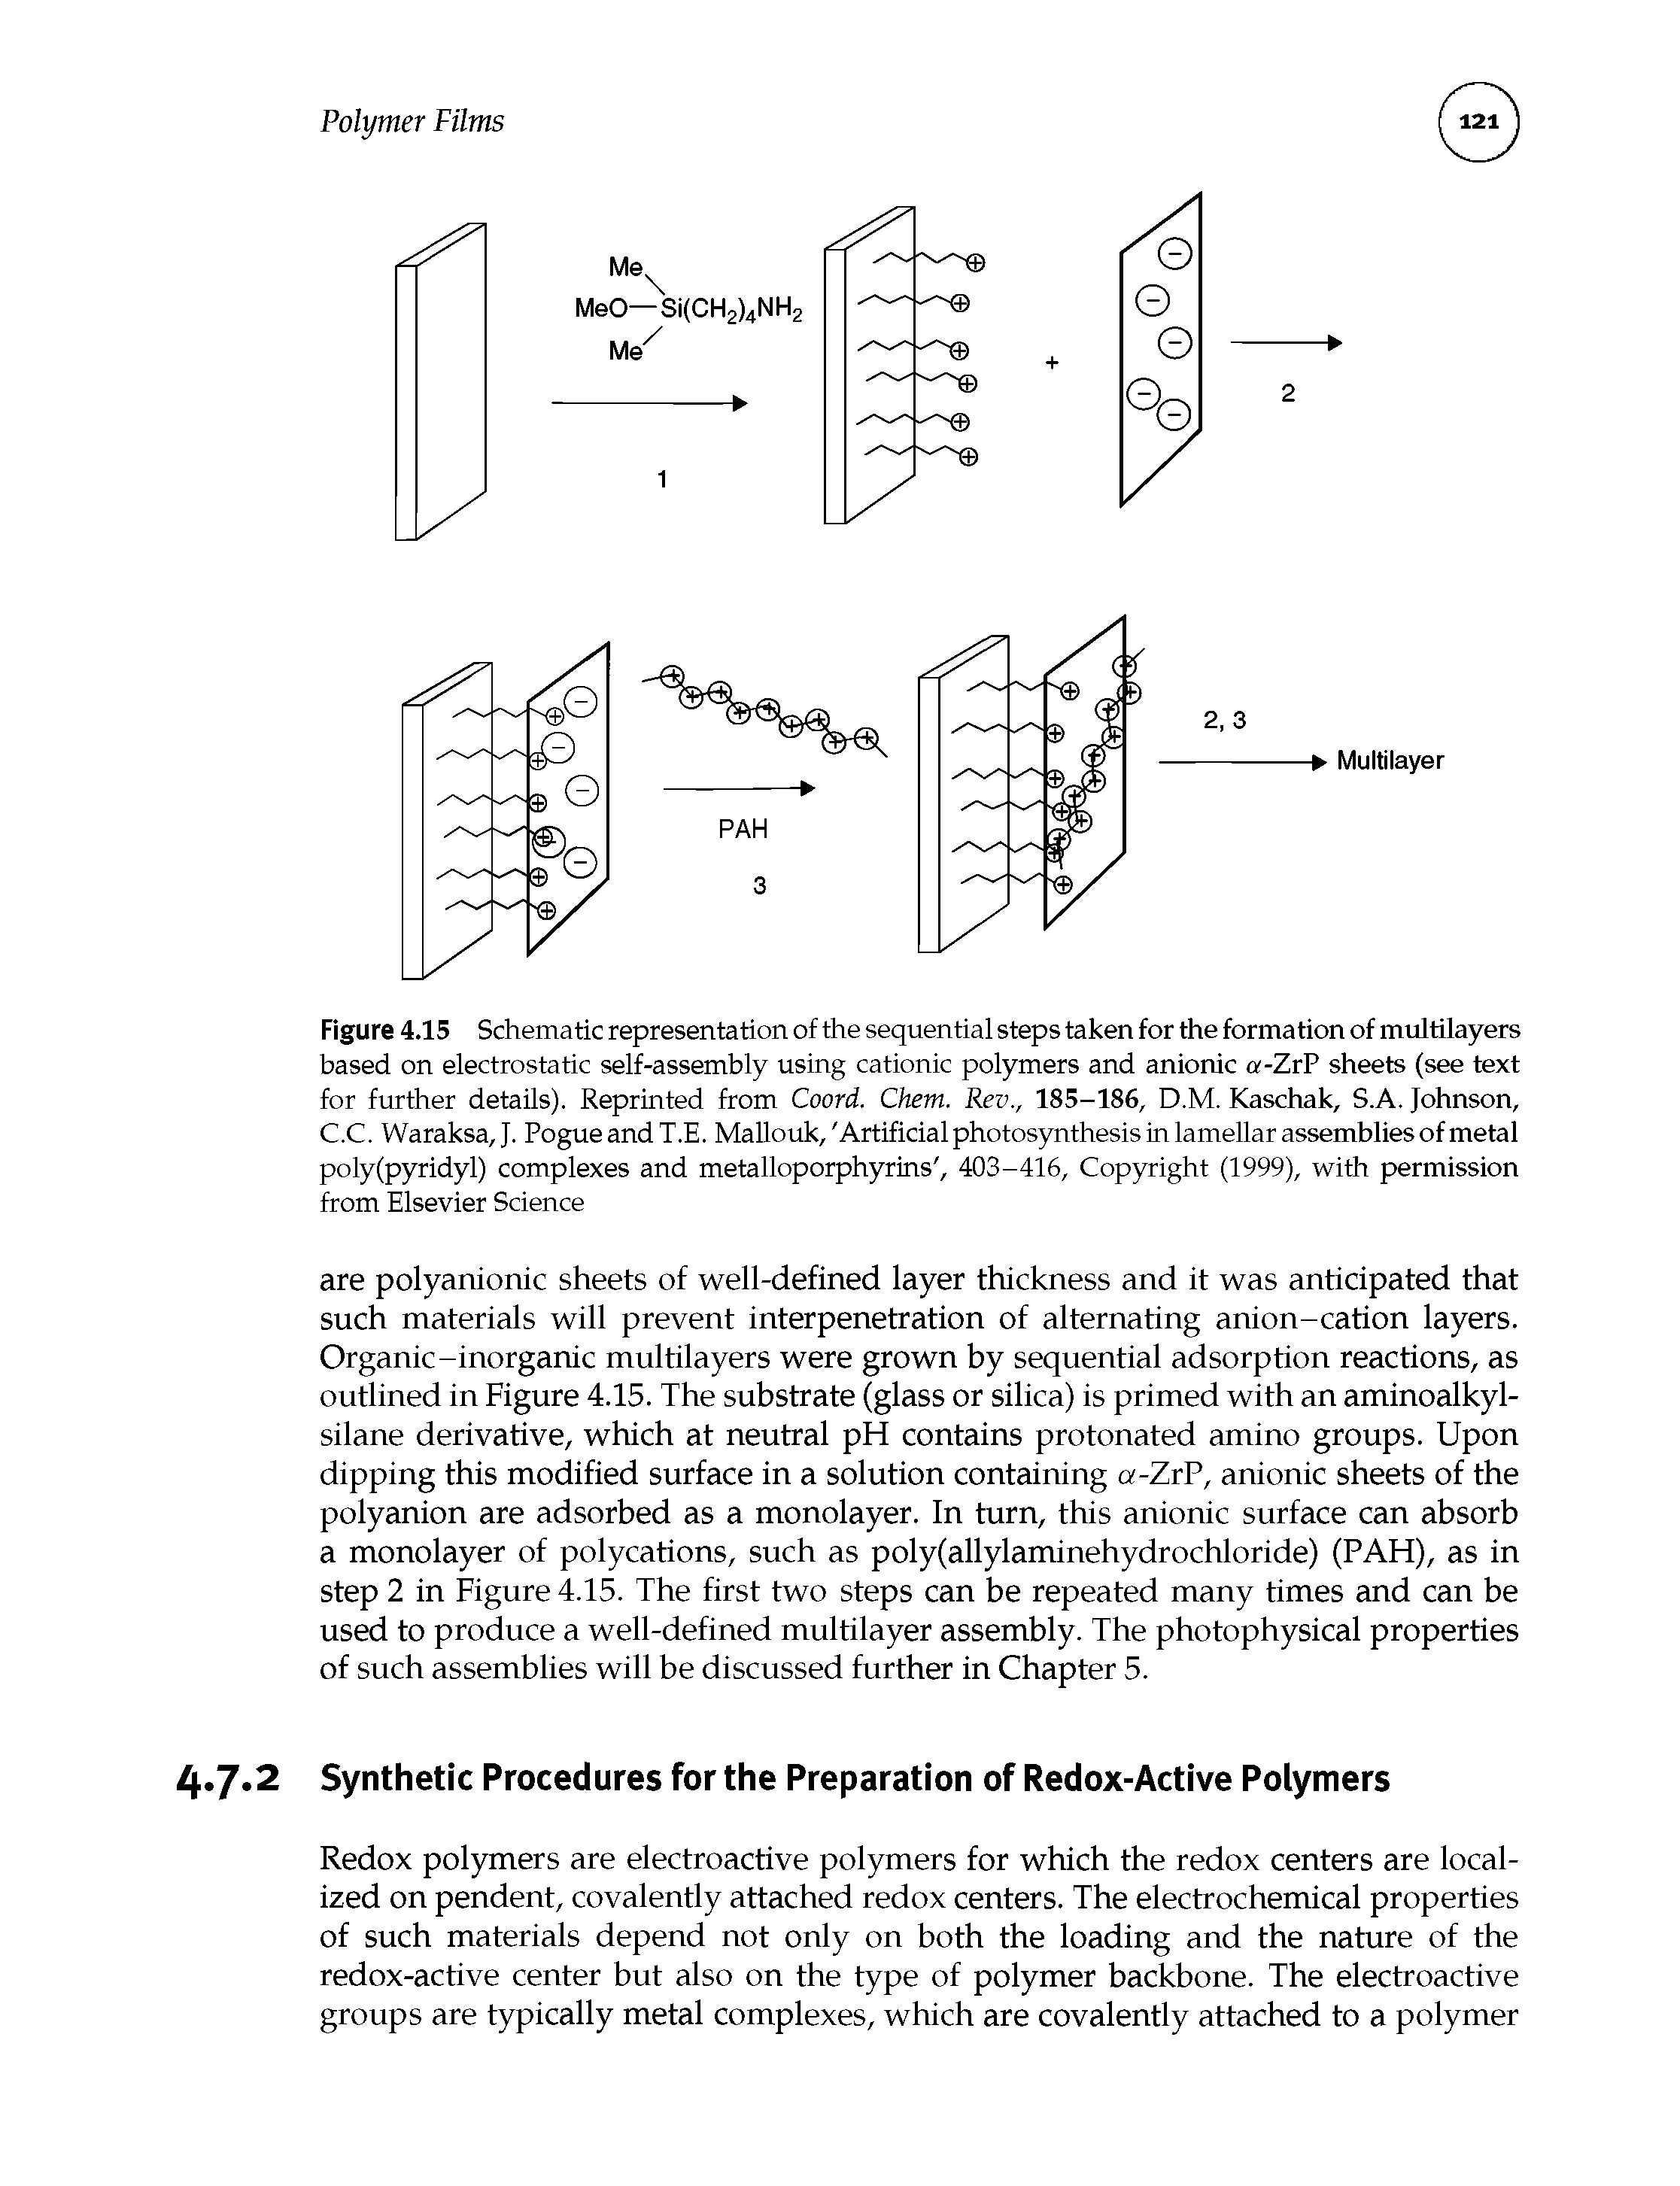 Figure 4.15 Schematic representation of the sequential steps taken for the formation of multilayers based on electrostatic self-assembly using cationic polymers and anionic a-ZrP sheets (see text for further details). Reprinted from Coord. Chem. Rev., 185-186, D.M. Kaschak, S.A. Johnson, C.C. Waraksa,J. Pogue and T.E. Mallouk, Artificial photosynthesis in lamellar assemblies of metal poly(pyridyl) complexes and metalloporphyrins, 403-416, Copyright (1999), with permission from Elsevier Science...